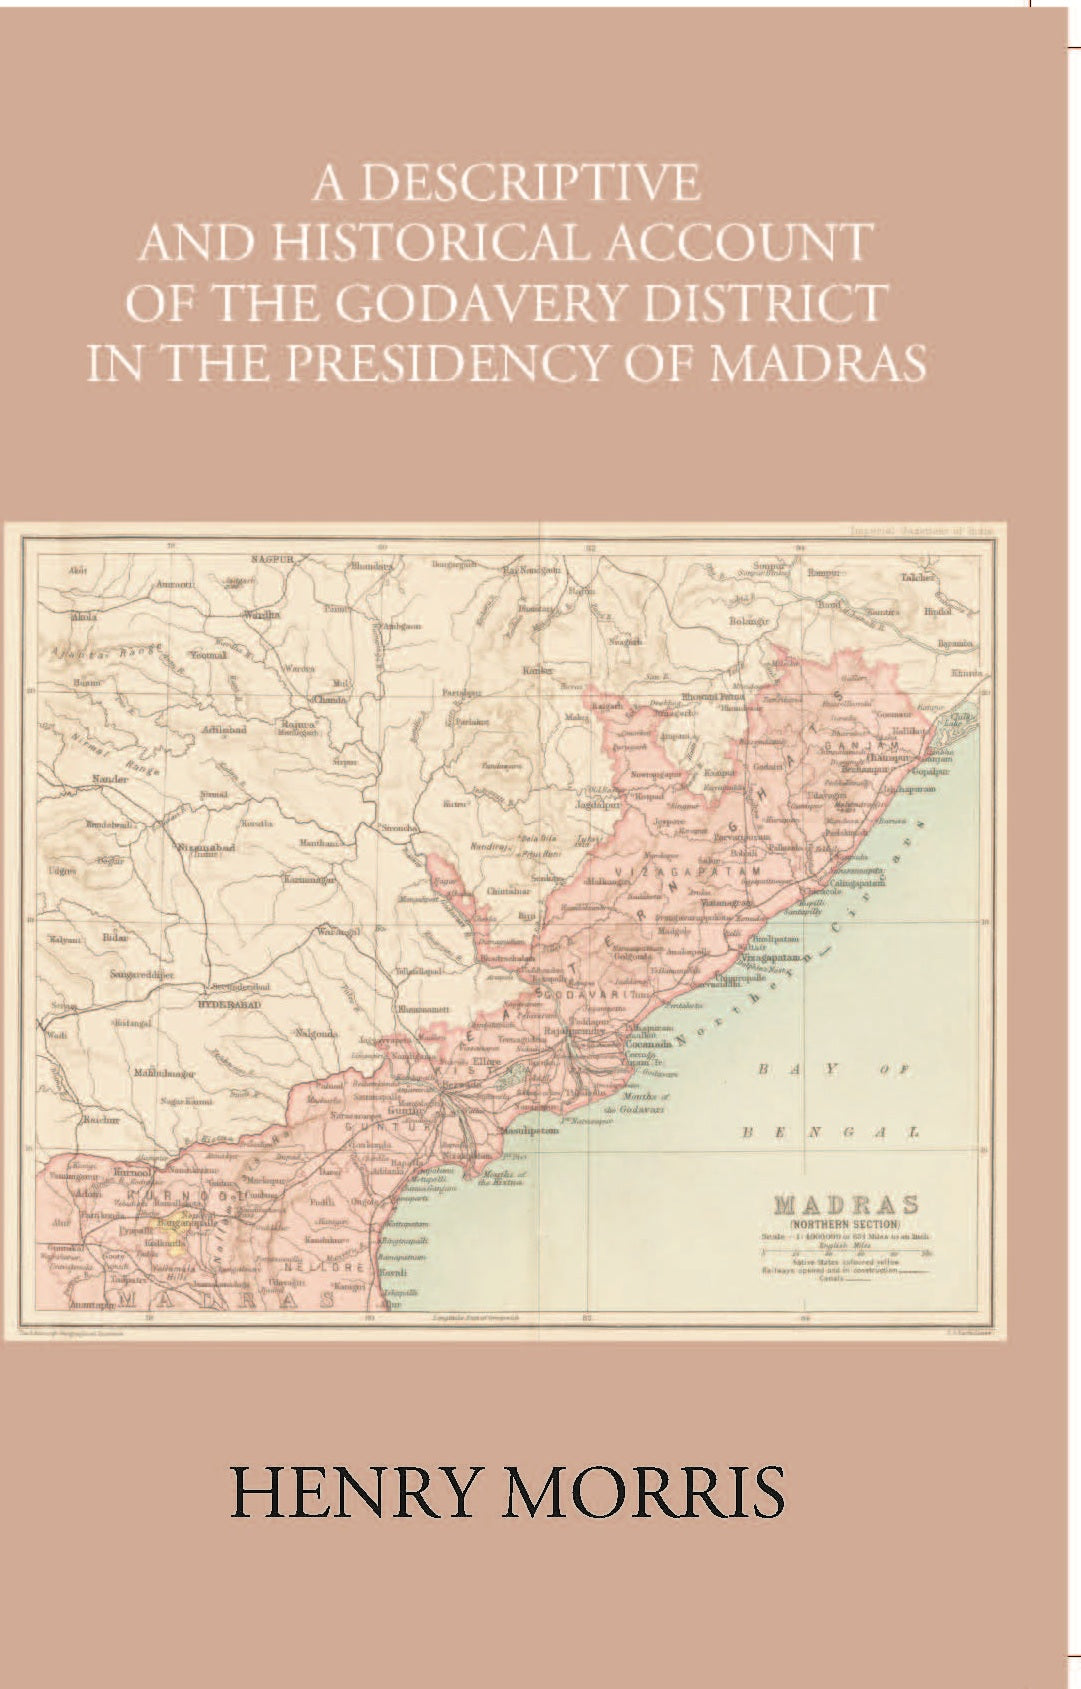 A Descriptive And Historical Account Of The Godavery District In The Presidency Of Madras